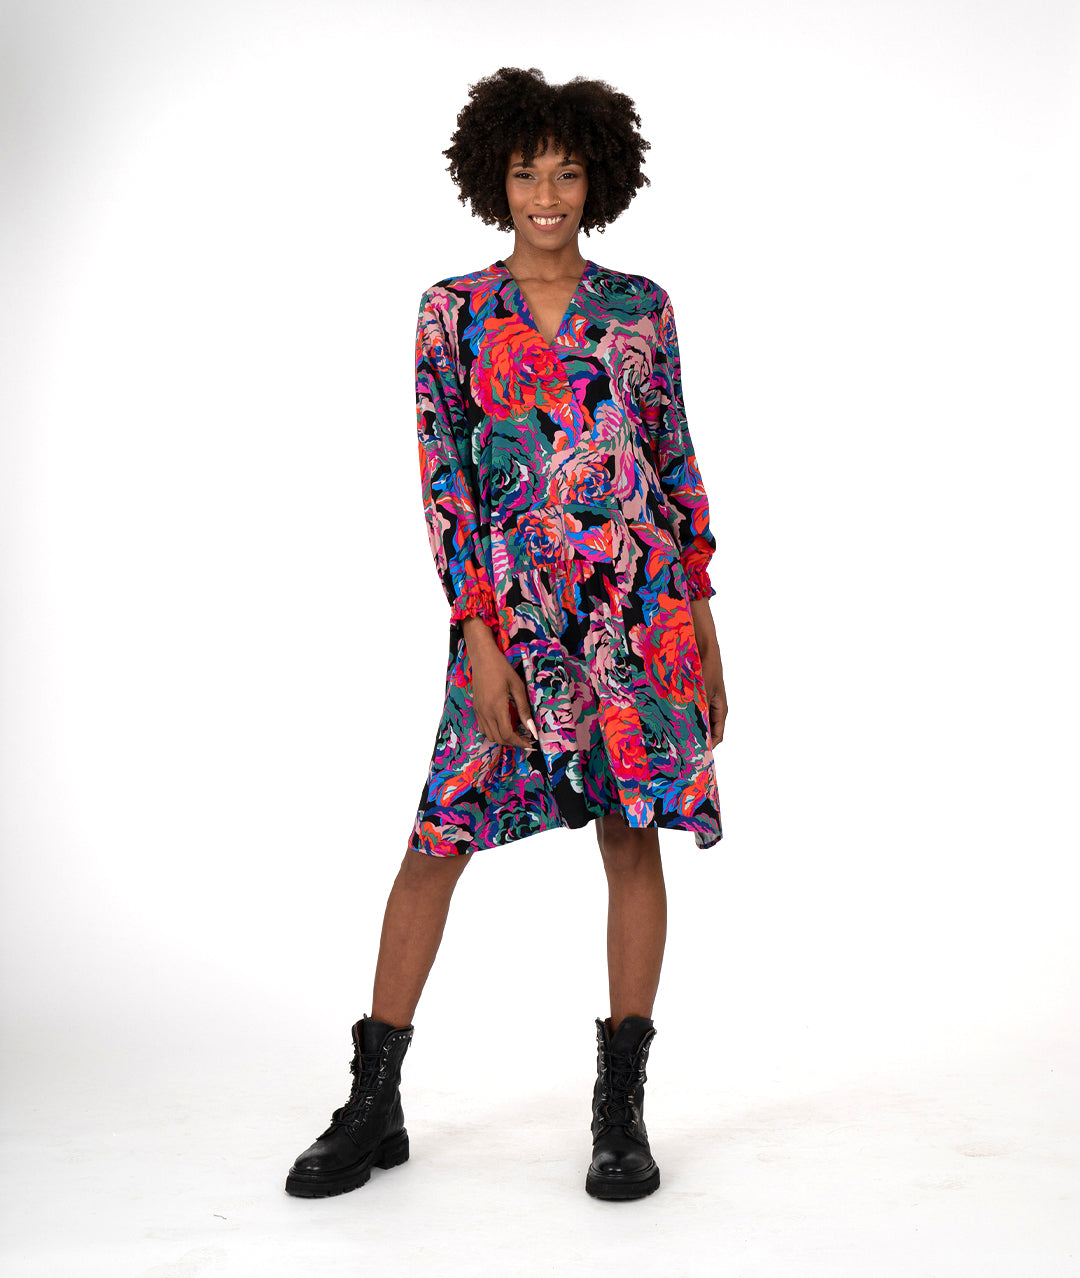 model in a floral print A-line shape dress has a plunging v-neck, gathers at the waist, elastic in the cuffs